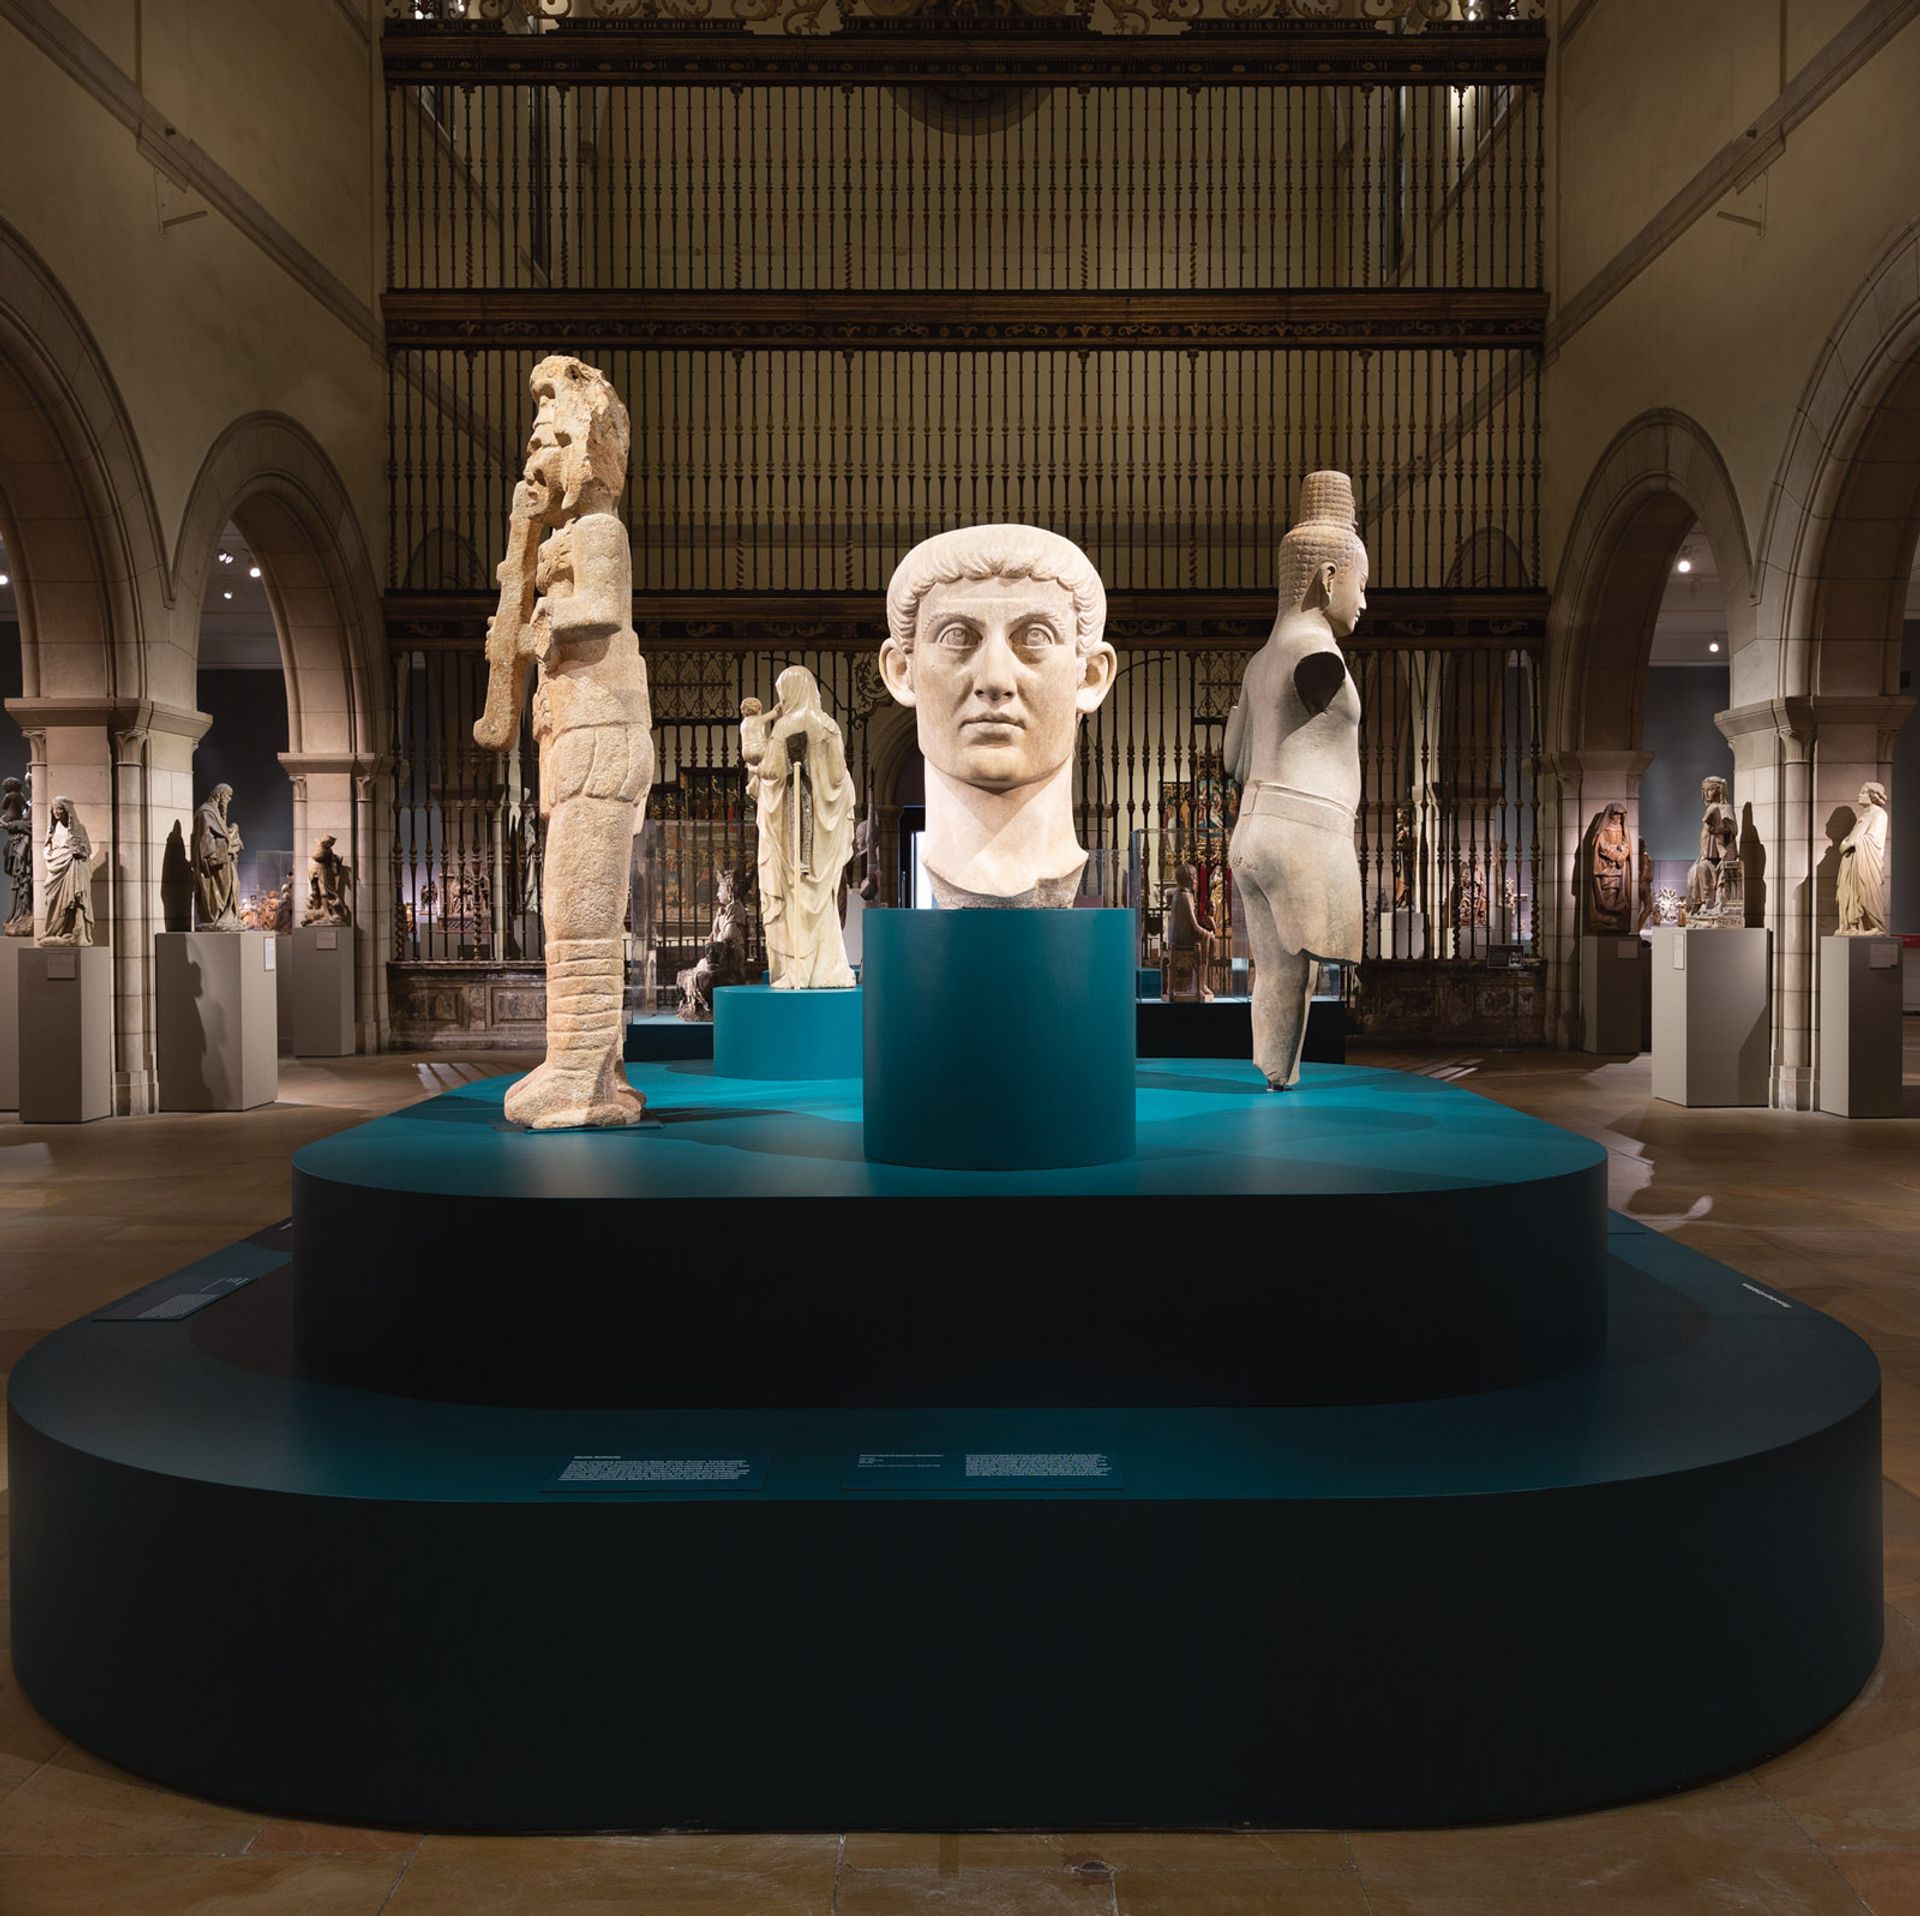 A new Crossroads permanent display juxtaposes sculptures from civilisations across the globe and across time Courtesy of the Metropolitan Museum of Art